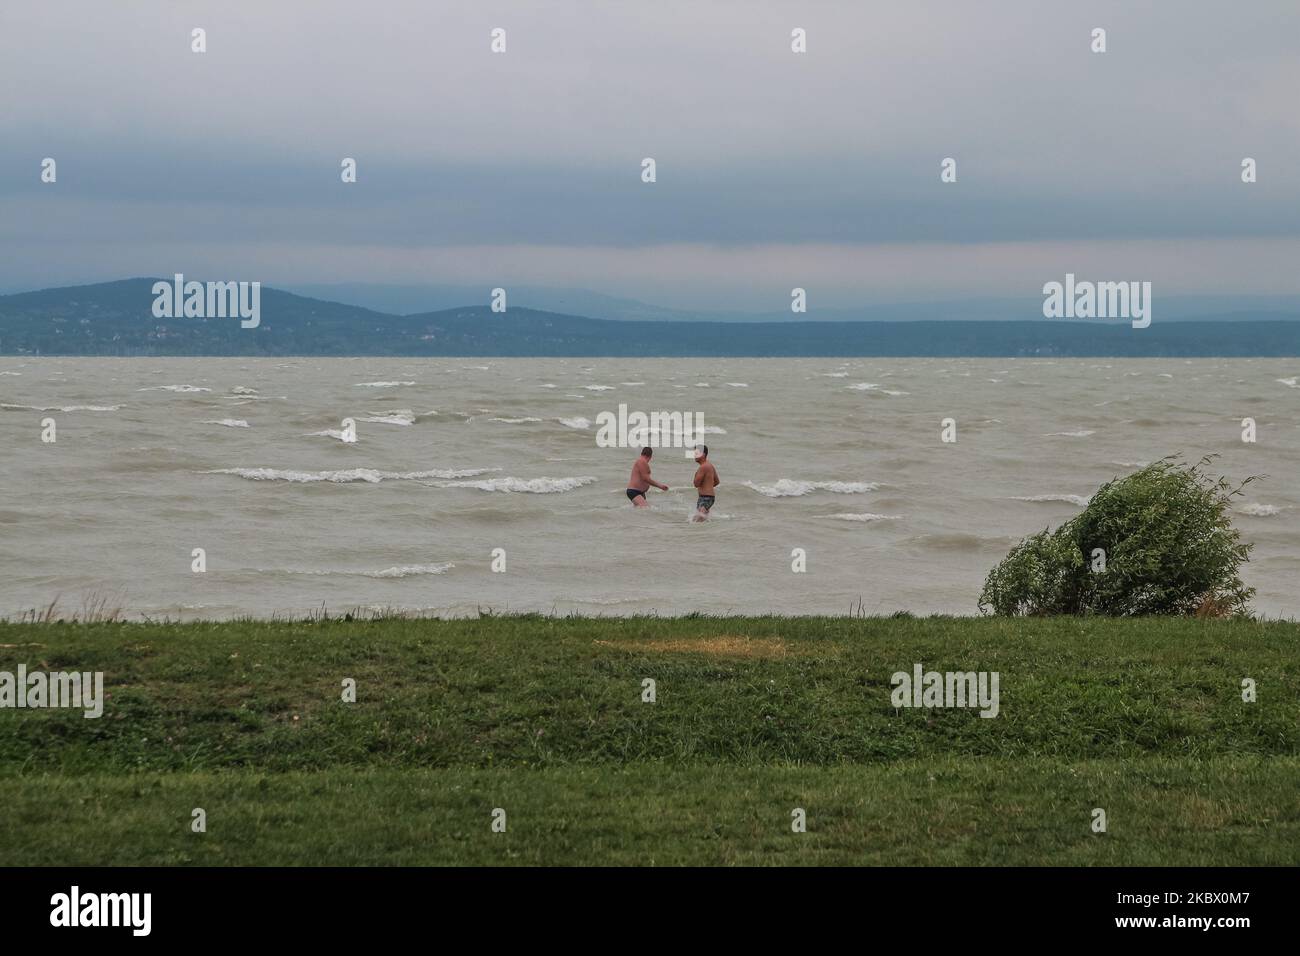 People taking a bath during stormy weather and high waves on the Balaton  lake at a dog friendly beach is seen in Fonyod, Hungary, on 5 August 2020  (Photo by Michal Fludra/NurPhoto